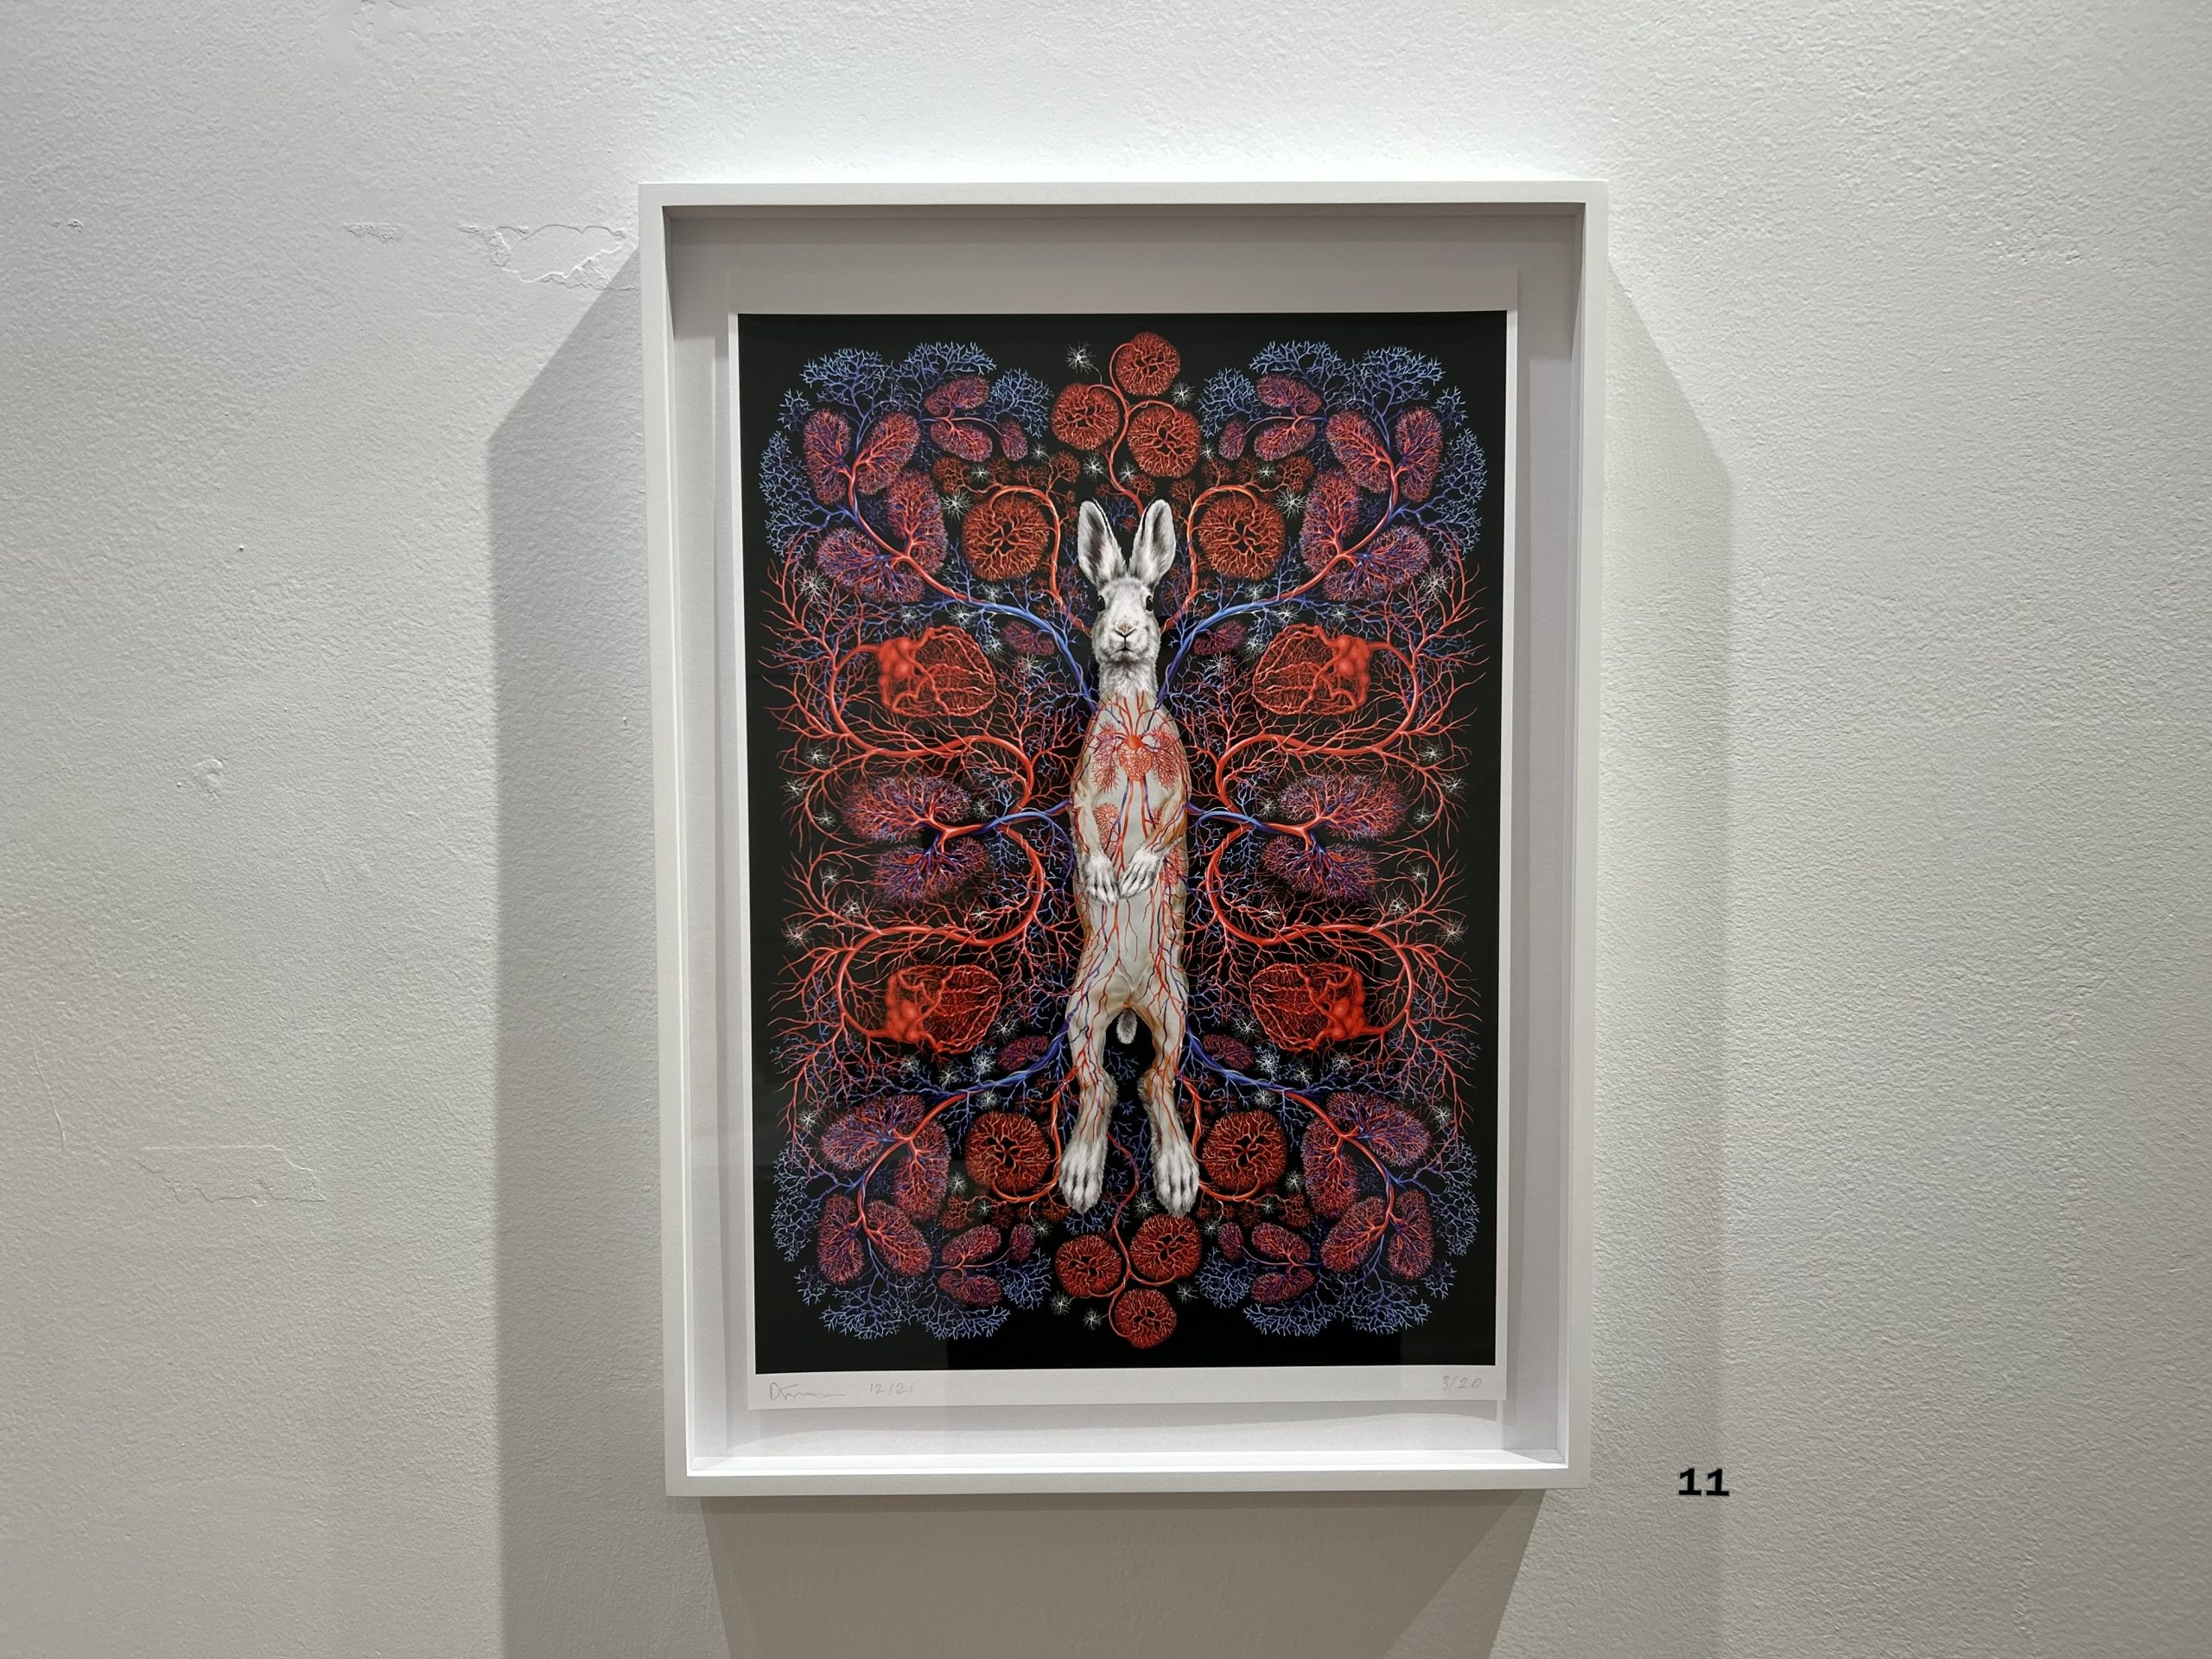 Image: Deborah Simon, Rabbit Kami Illuminated Border, 2021. In a white frame, a rabbit standing on its hind legs, belly facing the viewer. A nearly symmetrical series of red purple, and blue lines run from the center of its body out into the rest of the image, forming into organic shapes, reminiscent of plants. Courtesy of the International Museum of Surgical Science.